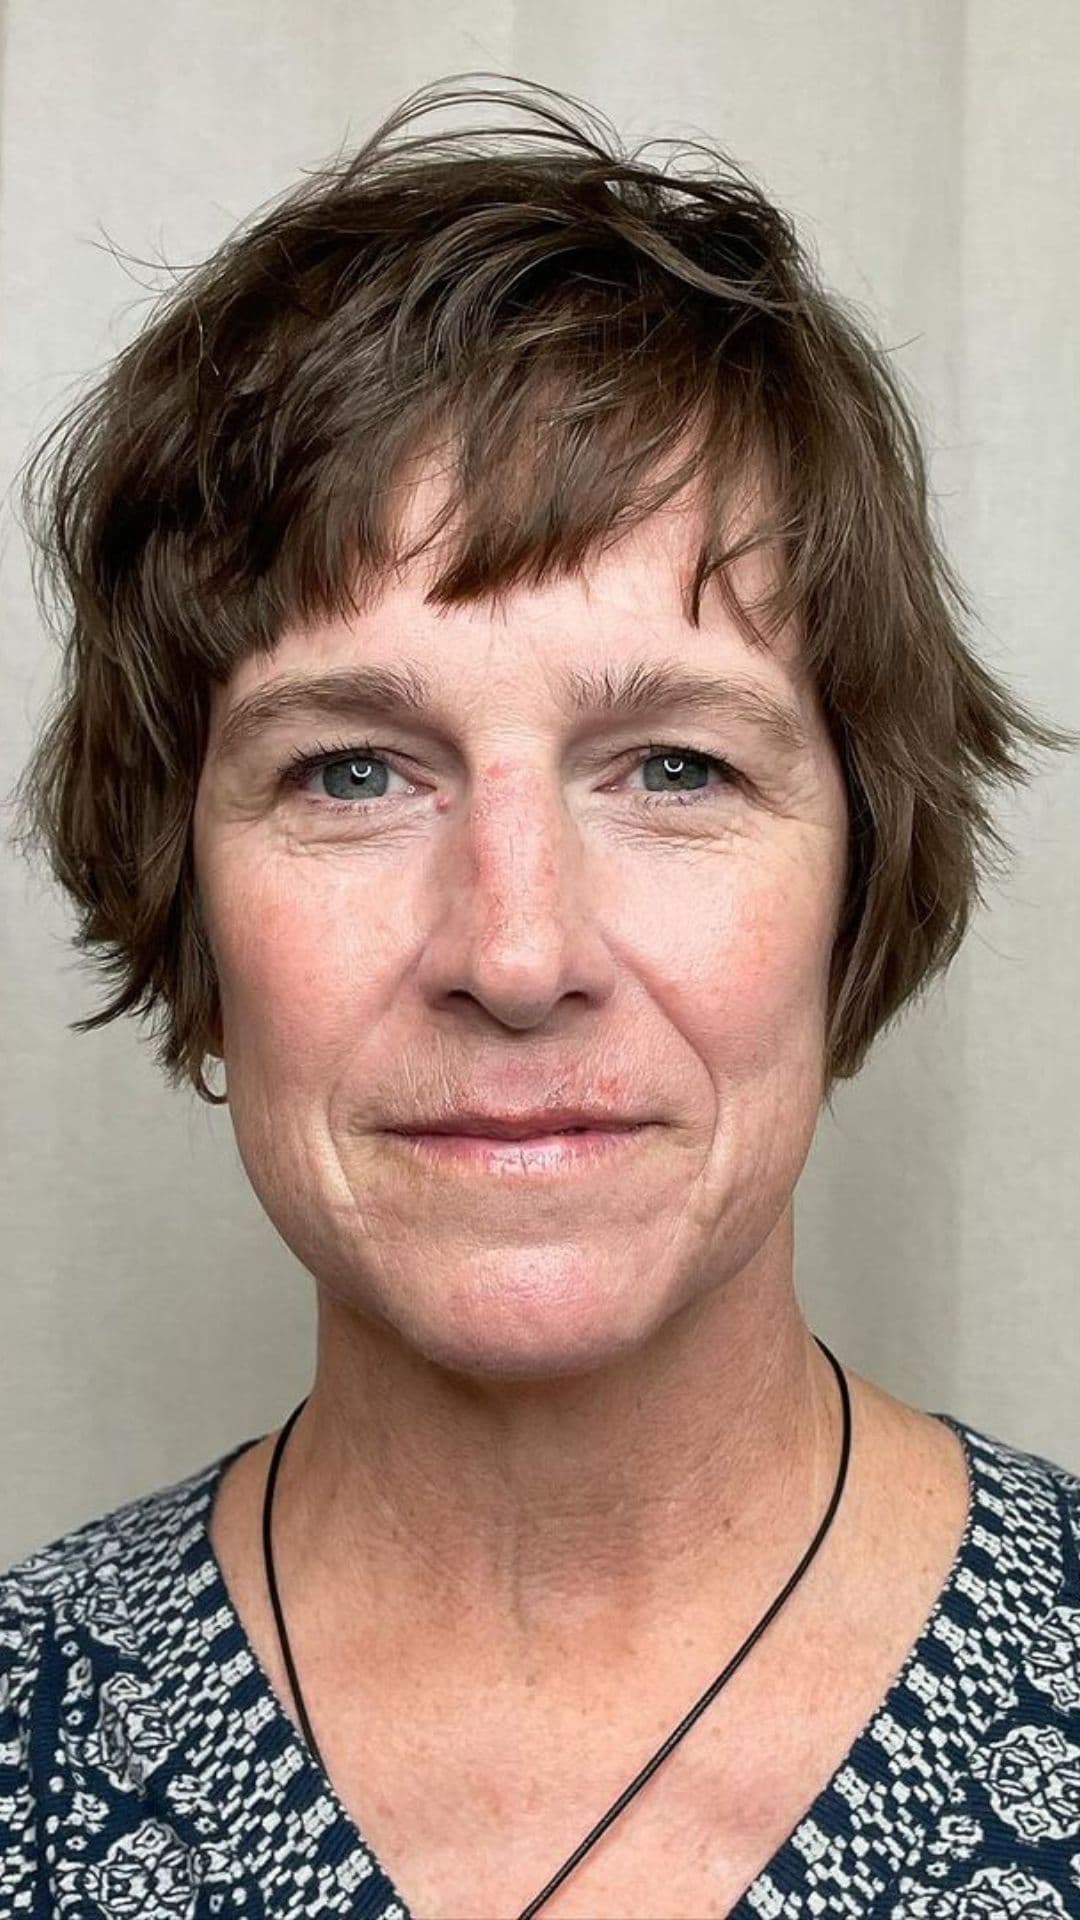 An older woman modelling a short shaggy wispy cut with fringe hairstyle.